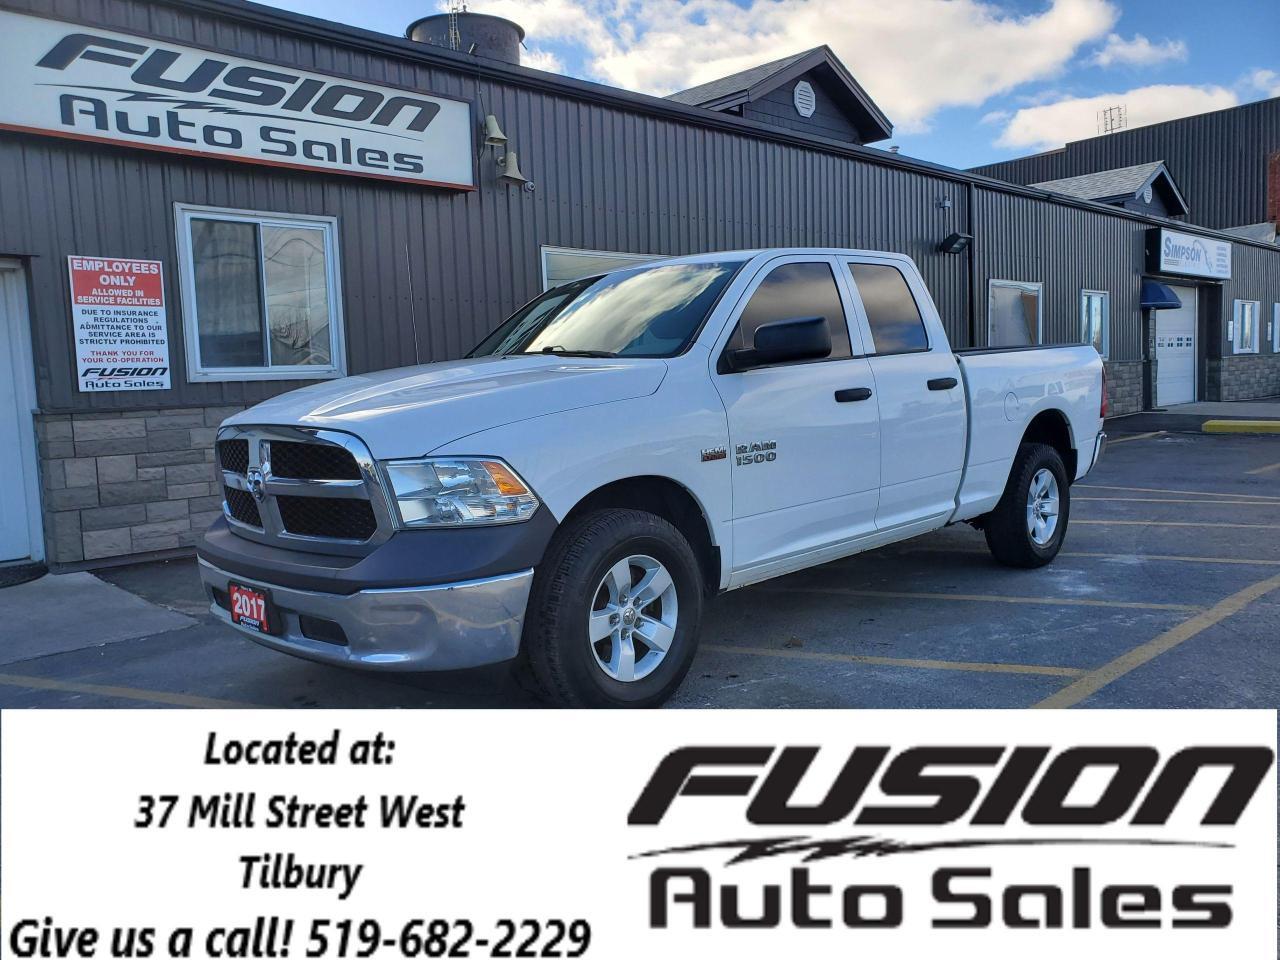 2017 Ram 1500 4WD-NO HST TO A MAX OF $2000 LTD TIME ONLY